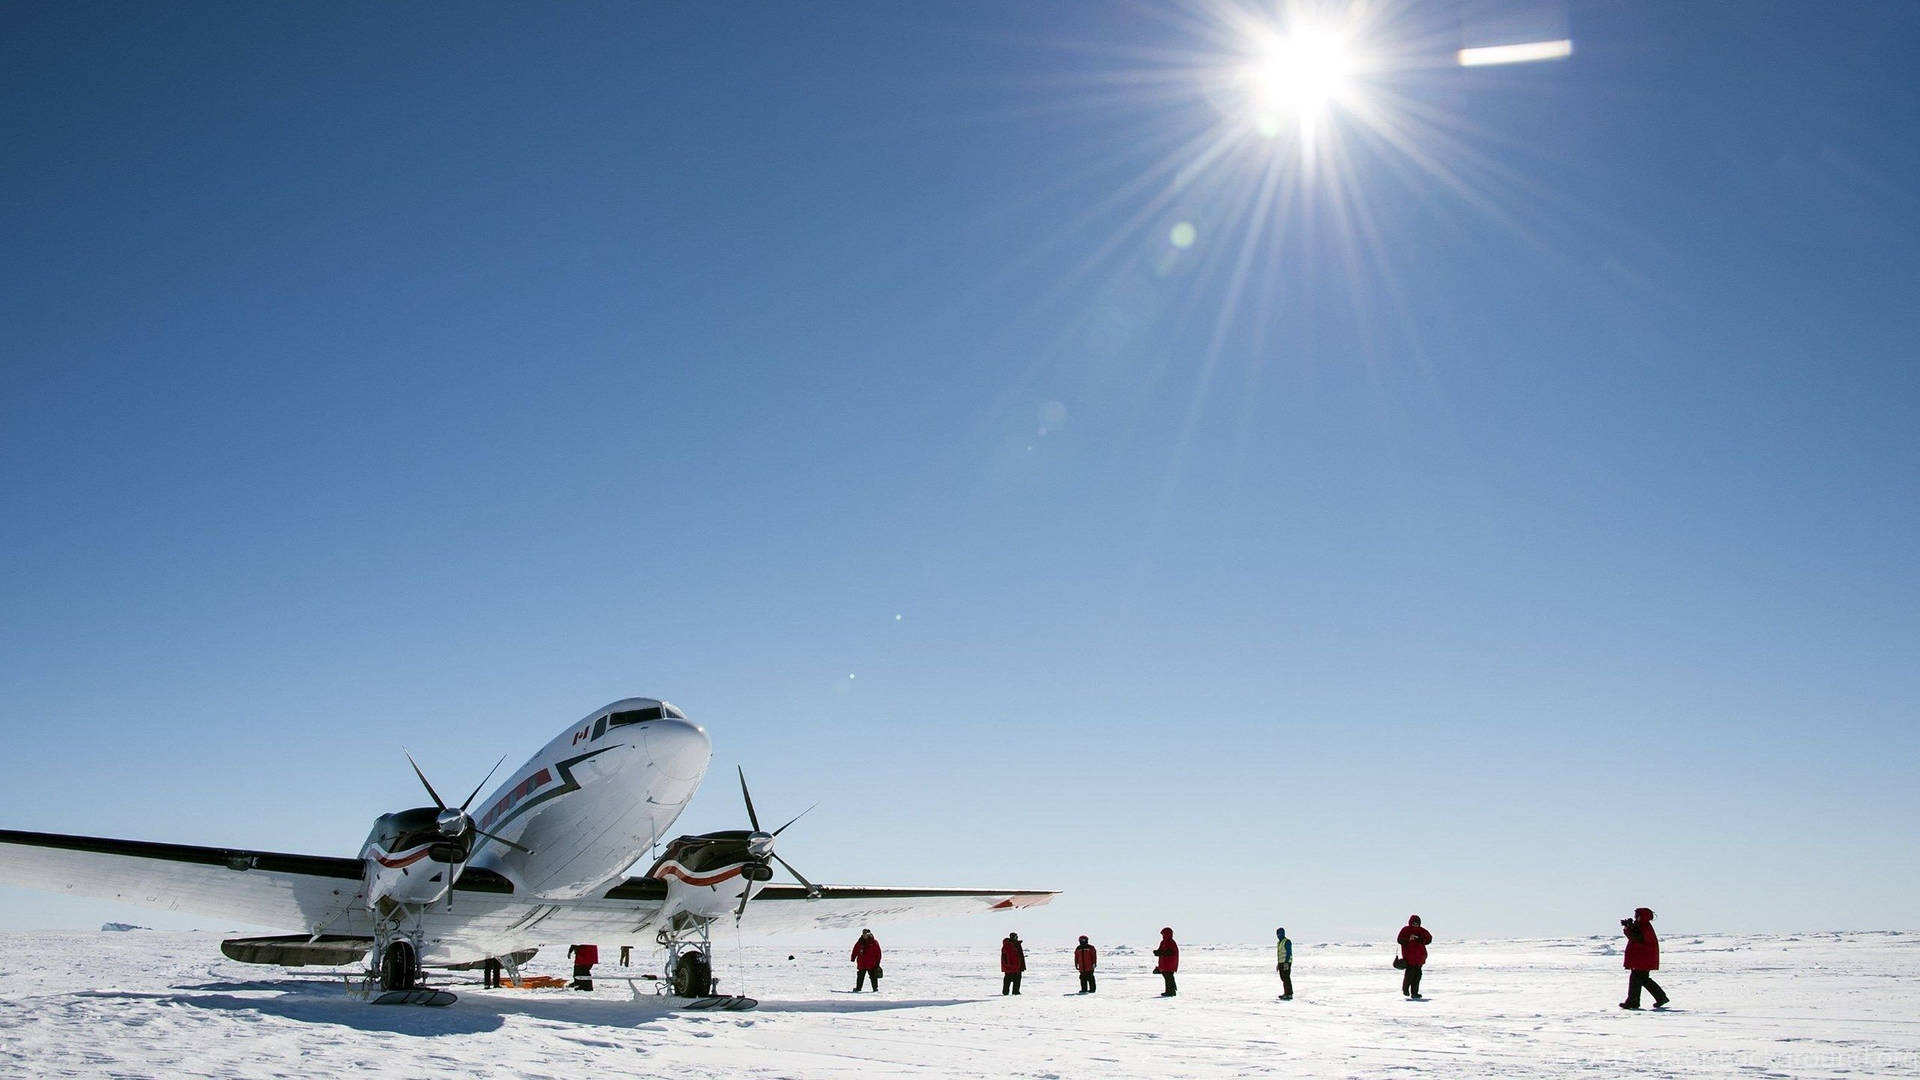 Antarctica With Airplane And People Background